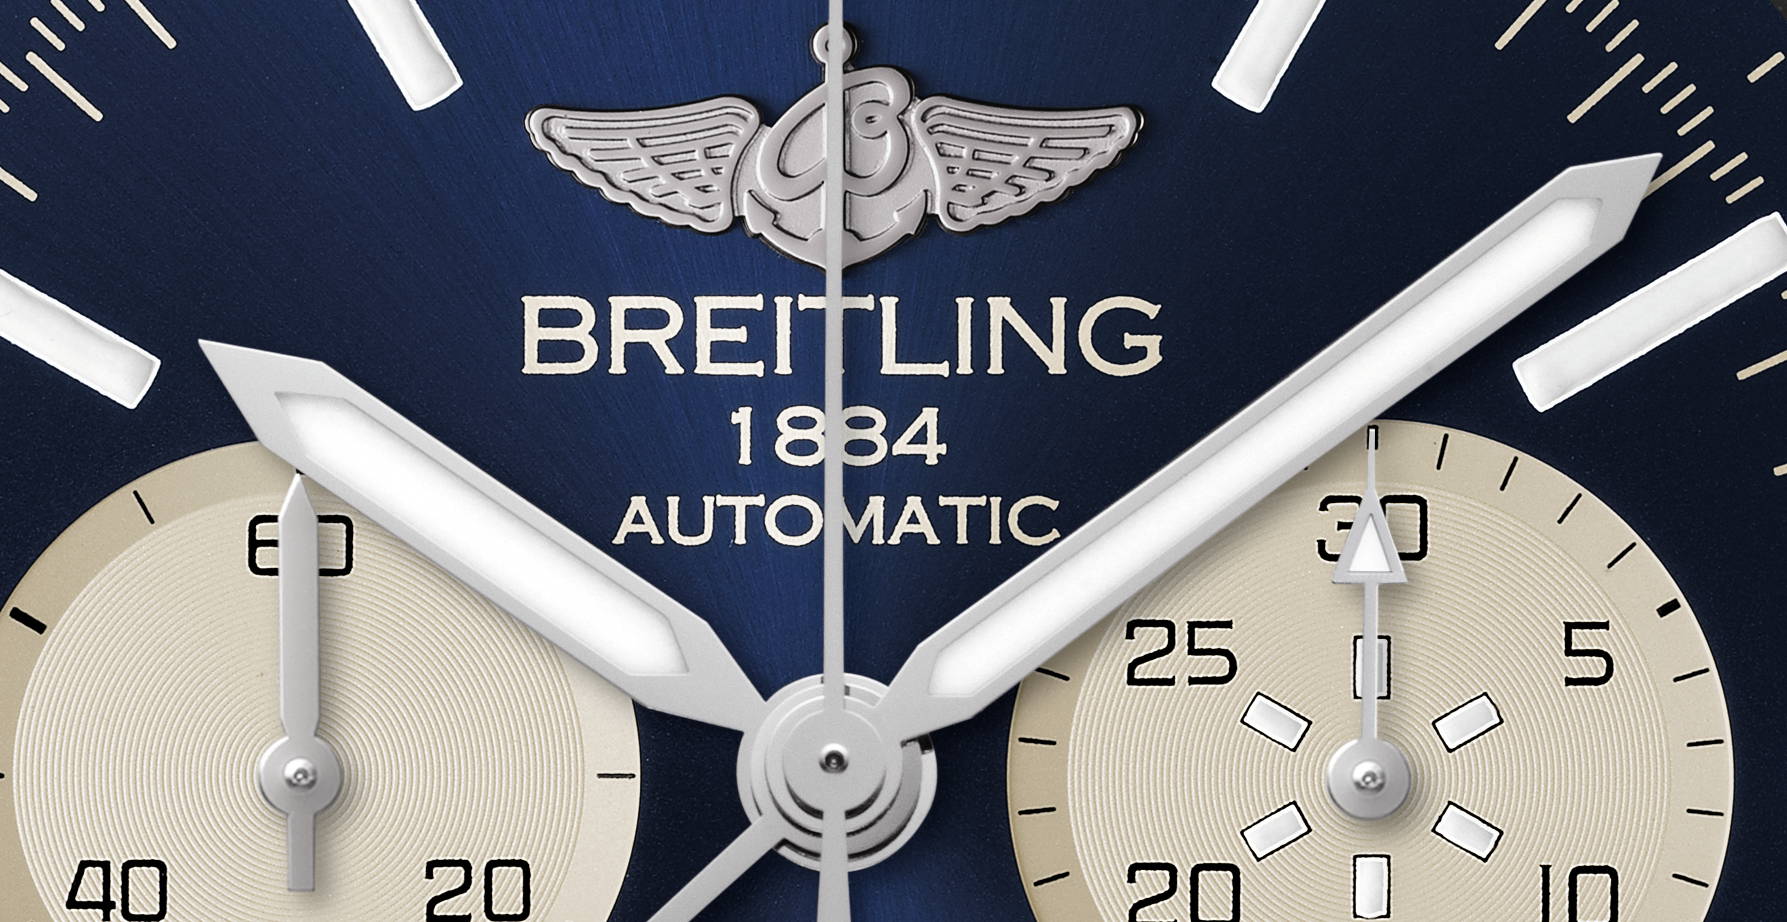 Breitling Chronoliner B04 Boutique Edition | Timeandwatches.pl